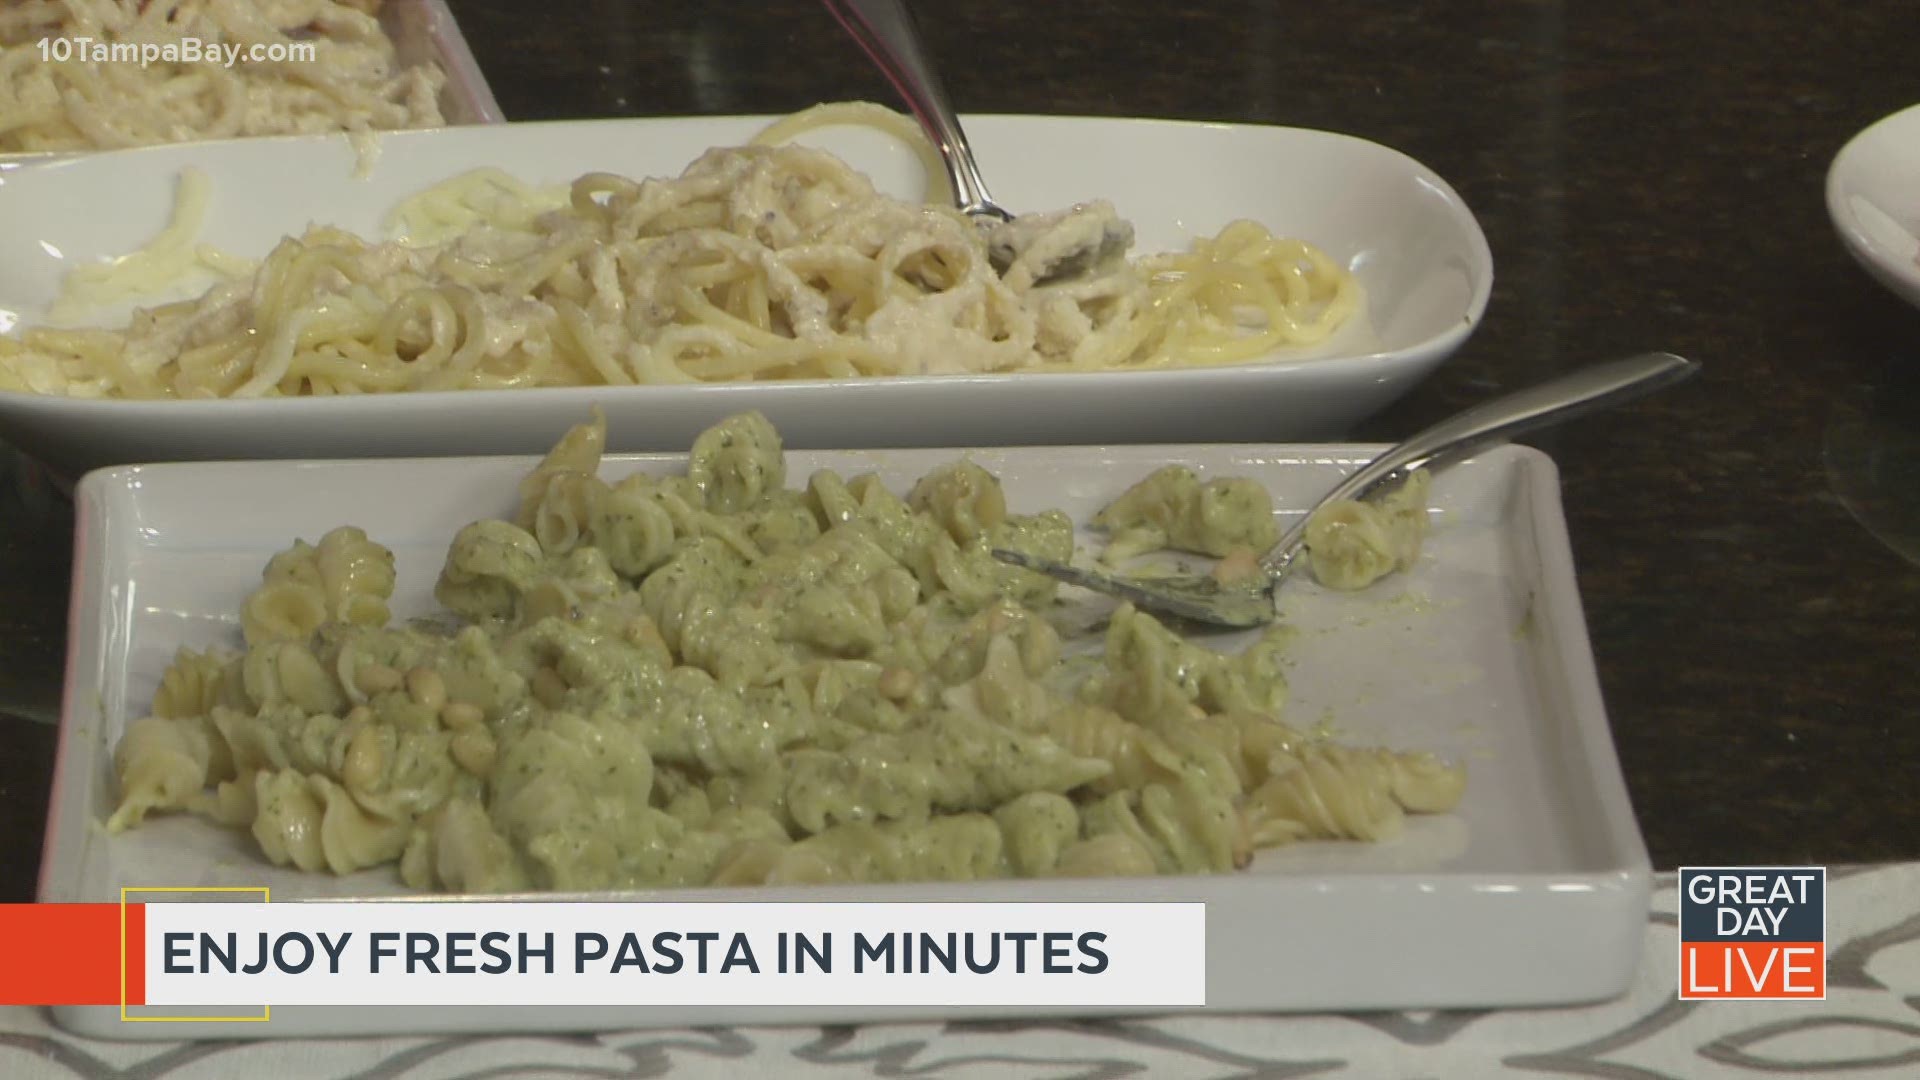 DalMoros Fresh Pasta To Go opens first U.S. location in St. Pete